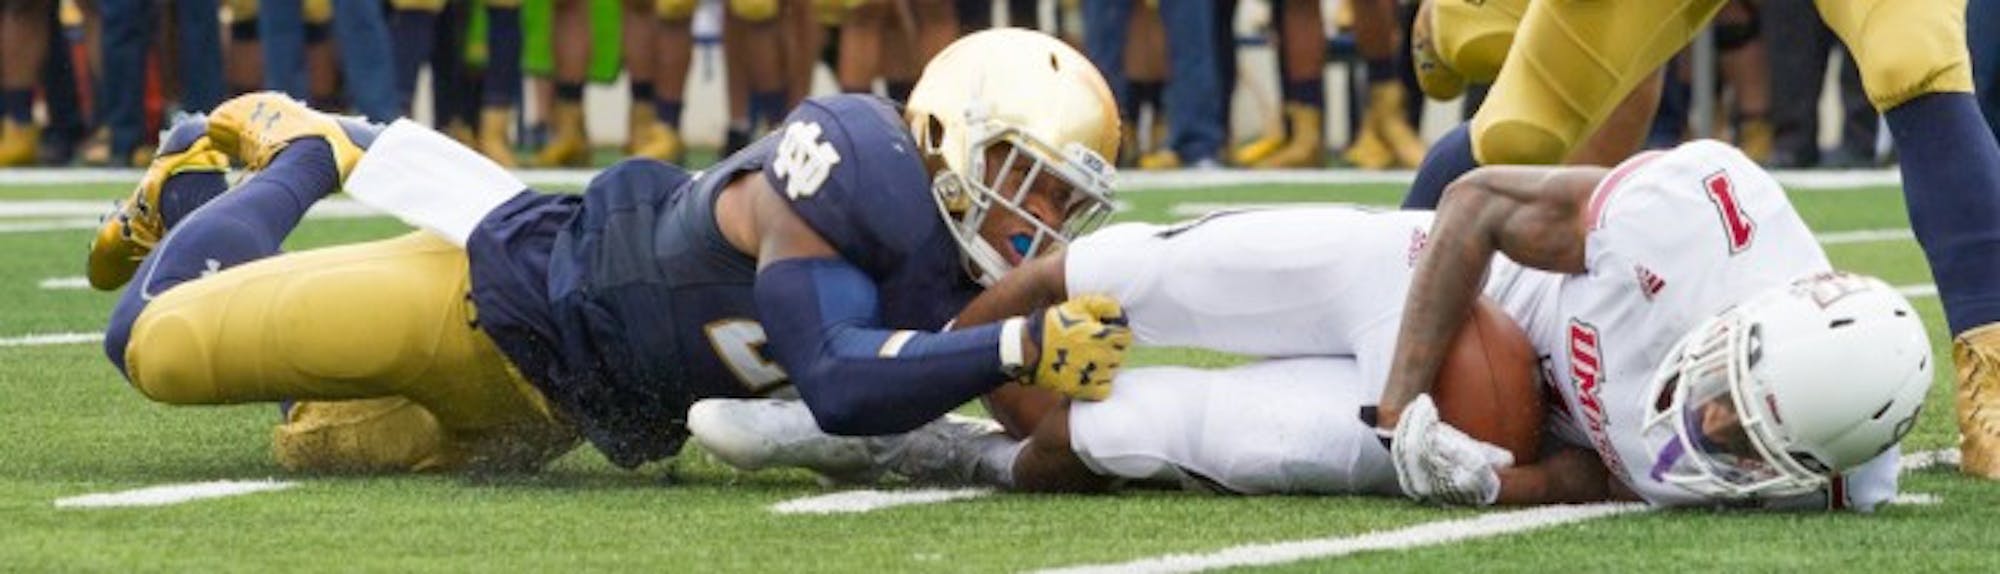 Shumate makes a tackle during Notre Dame's 38-3 win over Texas on Sept. 5 at Notre Dame Stadium.